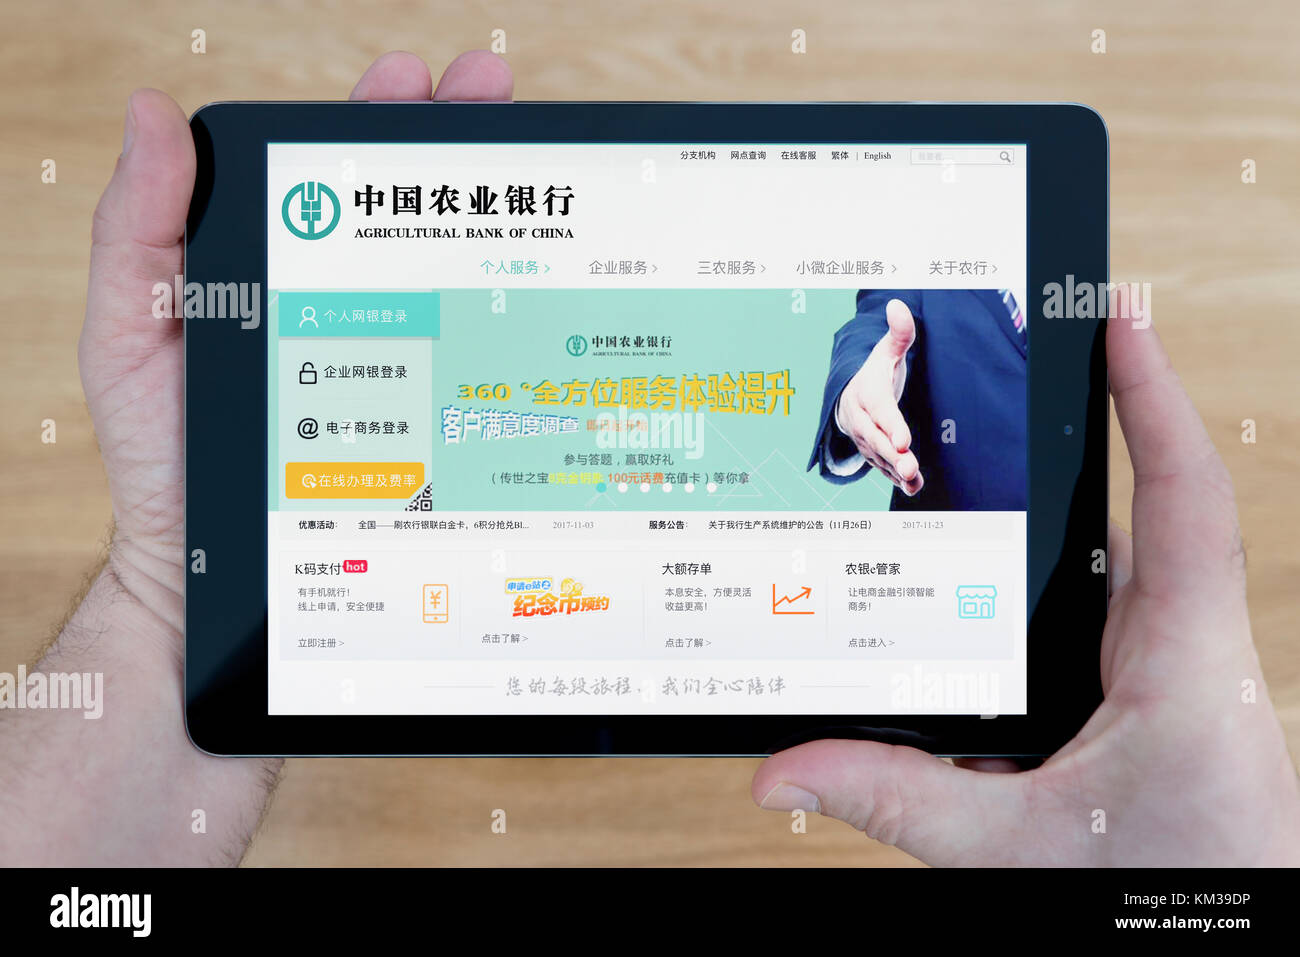 A man looks at the Agricultural Bank of China website on his iPad tablet device, shot against a wooden table top background (Editorial use only) Stock Photo